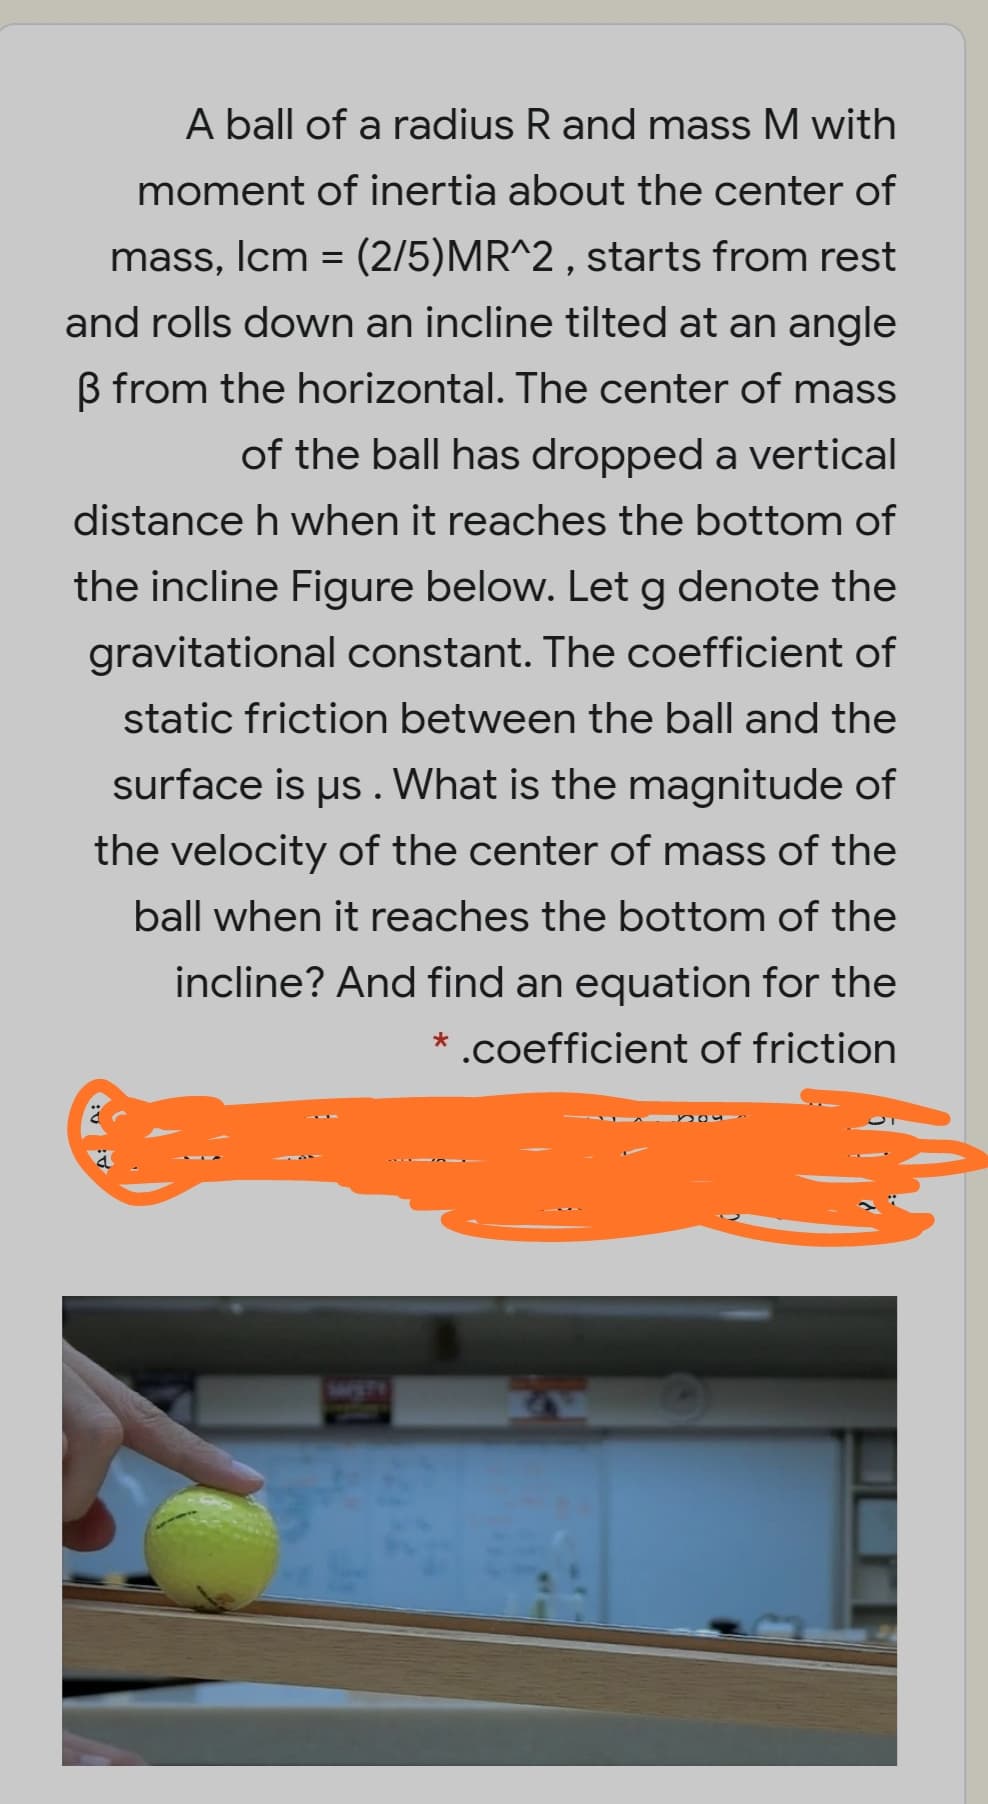 A ball of a radius R and mass M with
moment of inertia about the center of
mass, Icm = (2/5)MR^2 , starts from rest
and rolls down an incline tilted at an angle
B from the horizontal. The center of mass
of the ball has dropped a vertical
distance h when it reaches the bottom of
the incline Figure below. Let g denote the
gravitational constant. The coefficient of
static friction between the ball and the
surface is us . What is the magnitude of
the velocity of the center of mass of the
ball when it reaches the bottom of the
incline? And find an equation for the
* .coefficient of friction
WETE
